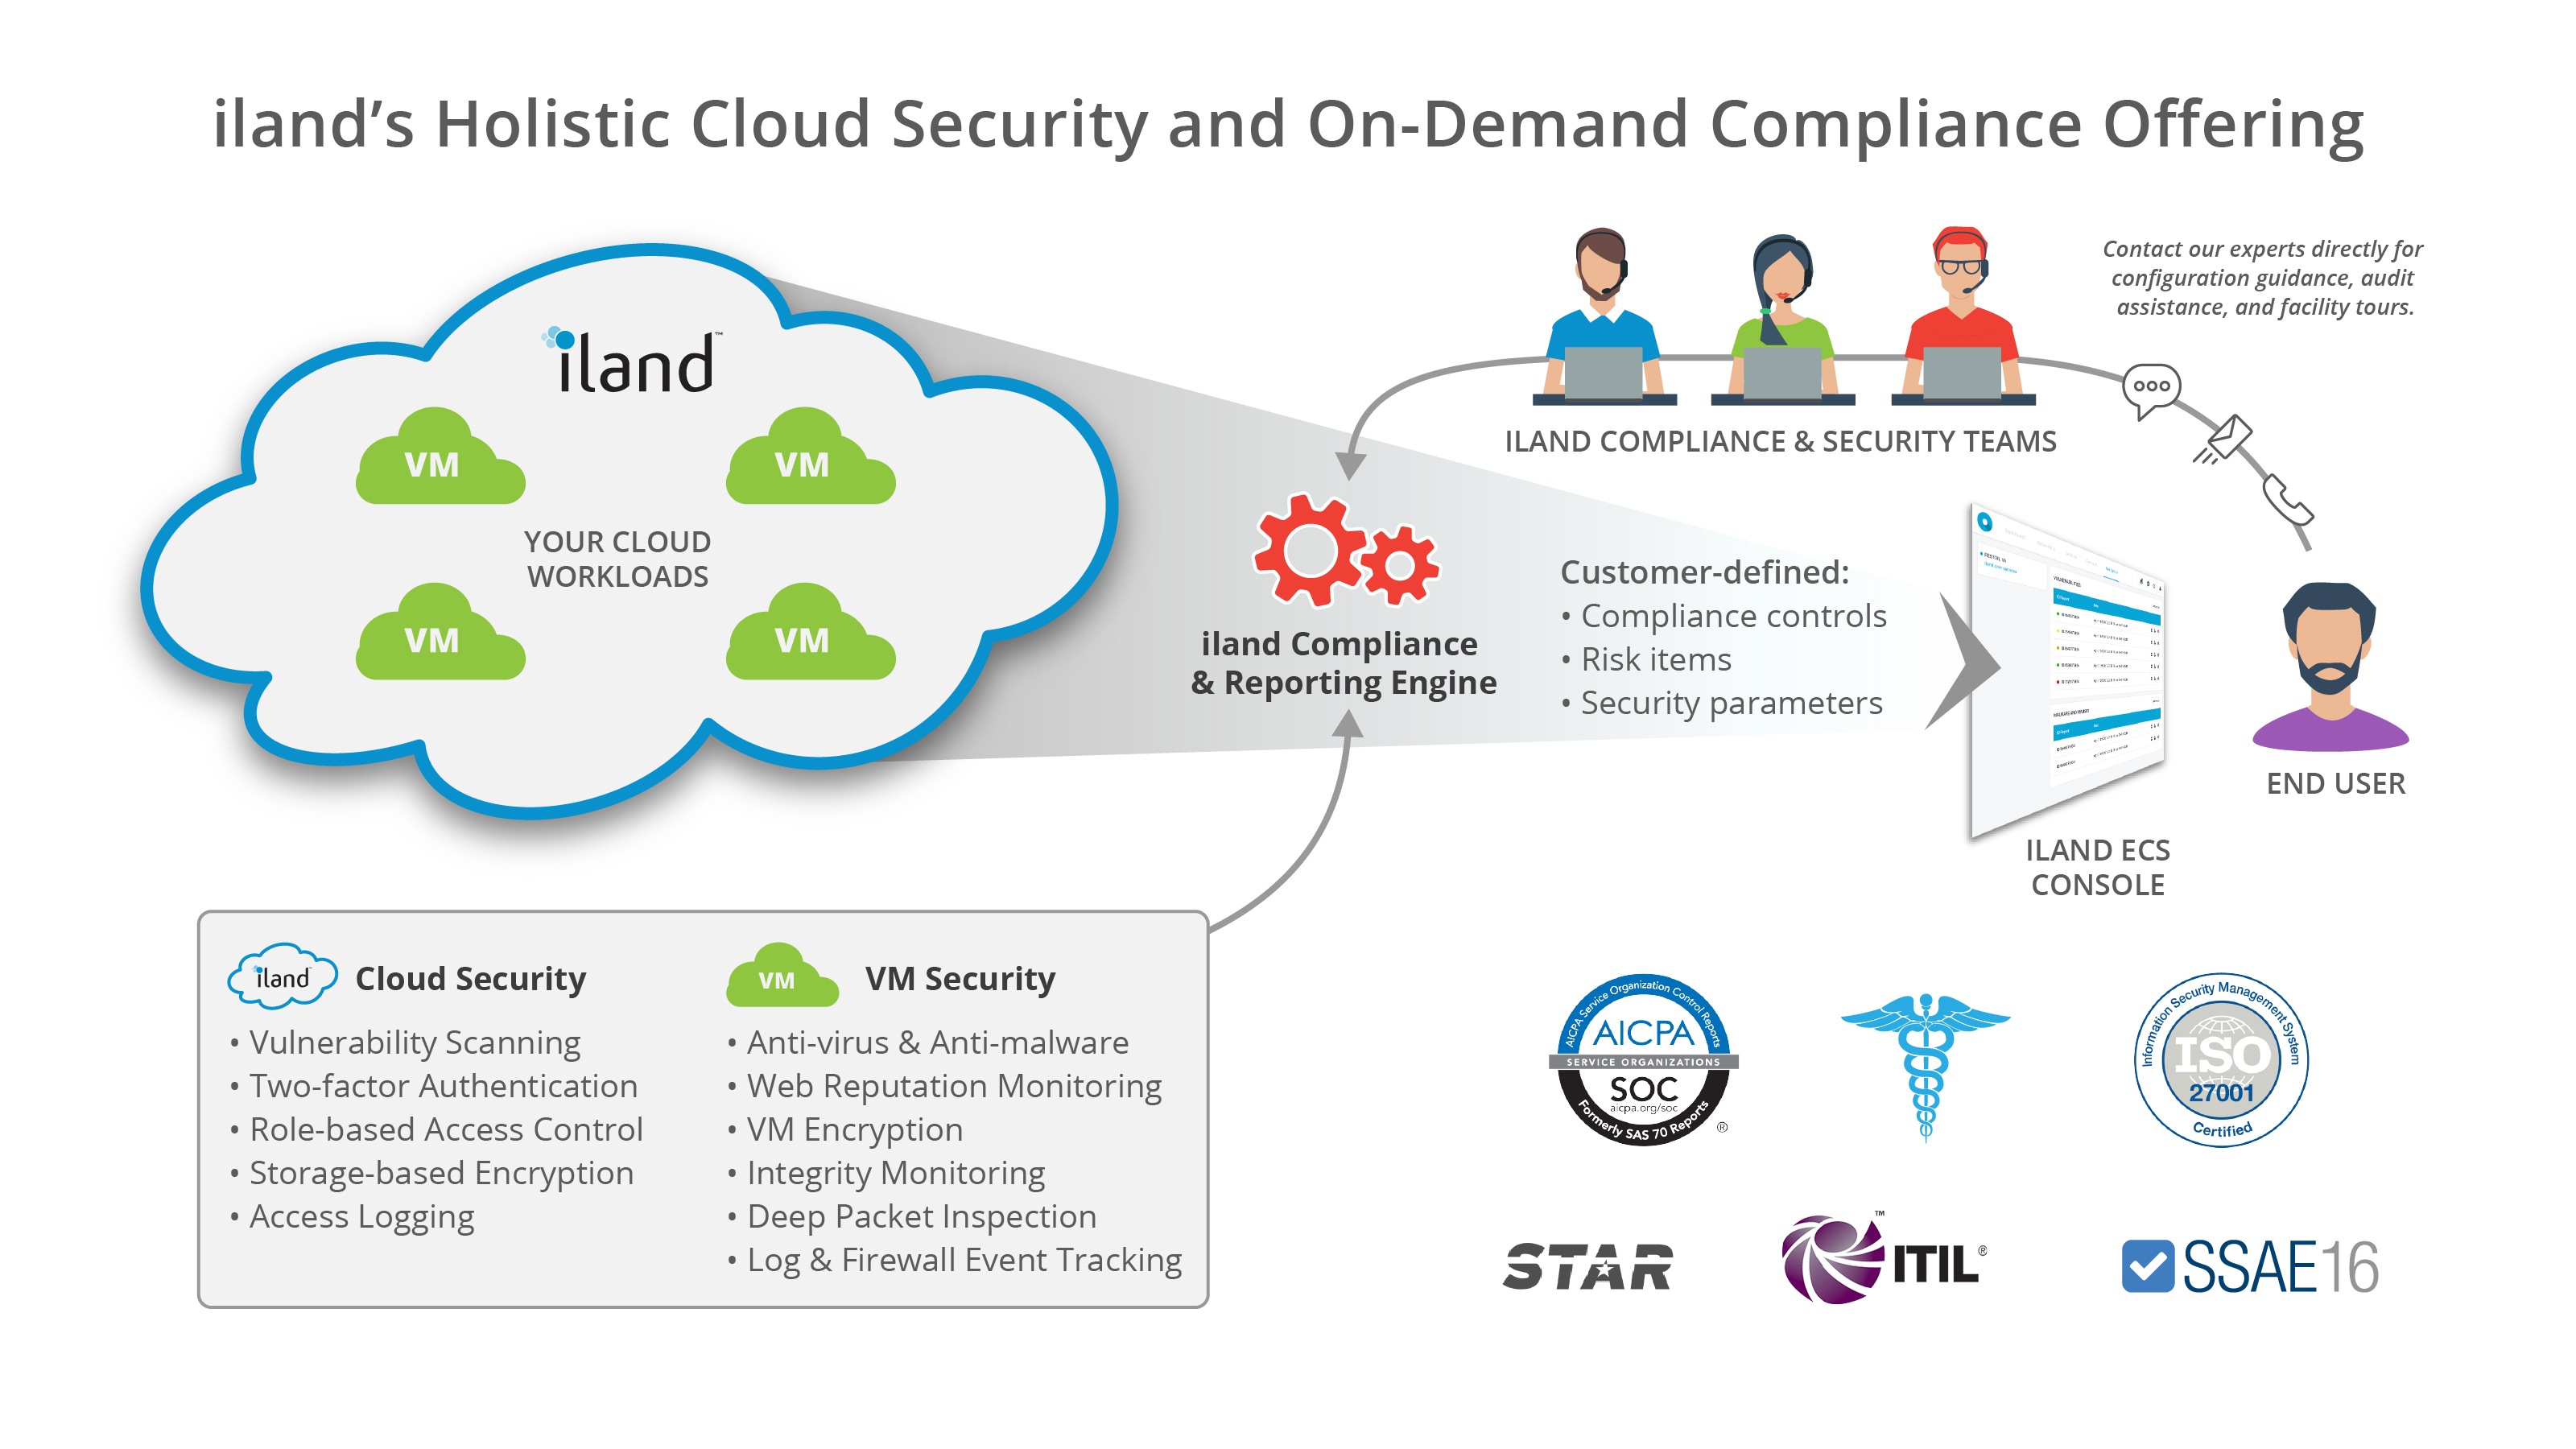 iland's Holistic Cloud Security and On-Demand Compliance Offering